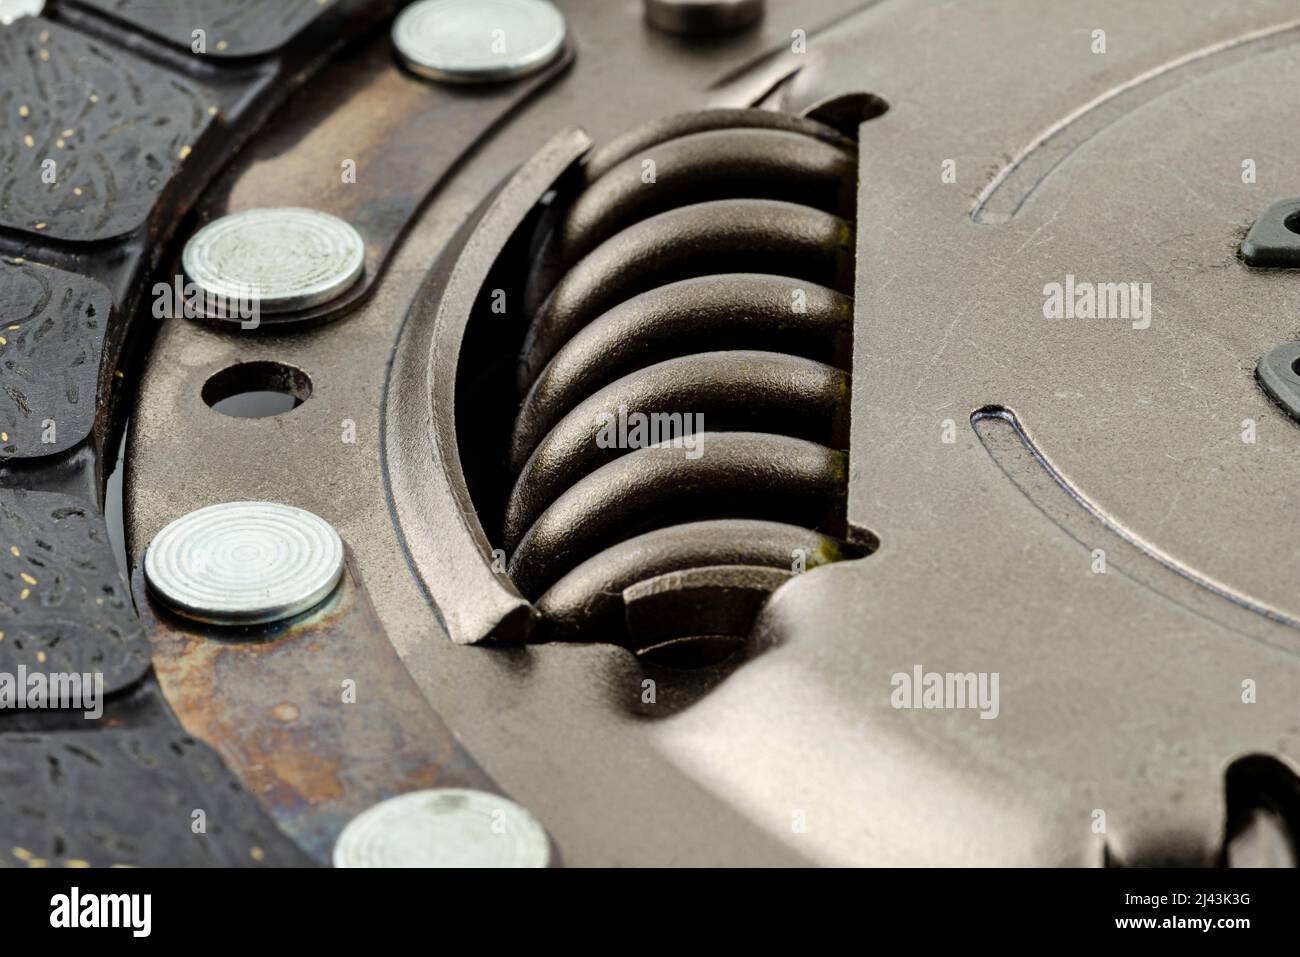 Used car clutch, macro shots for damping springs, isolated on a white background. Stock Photo